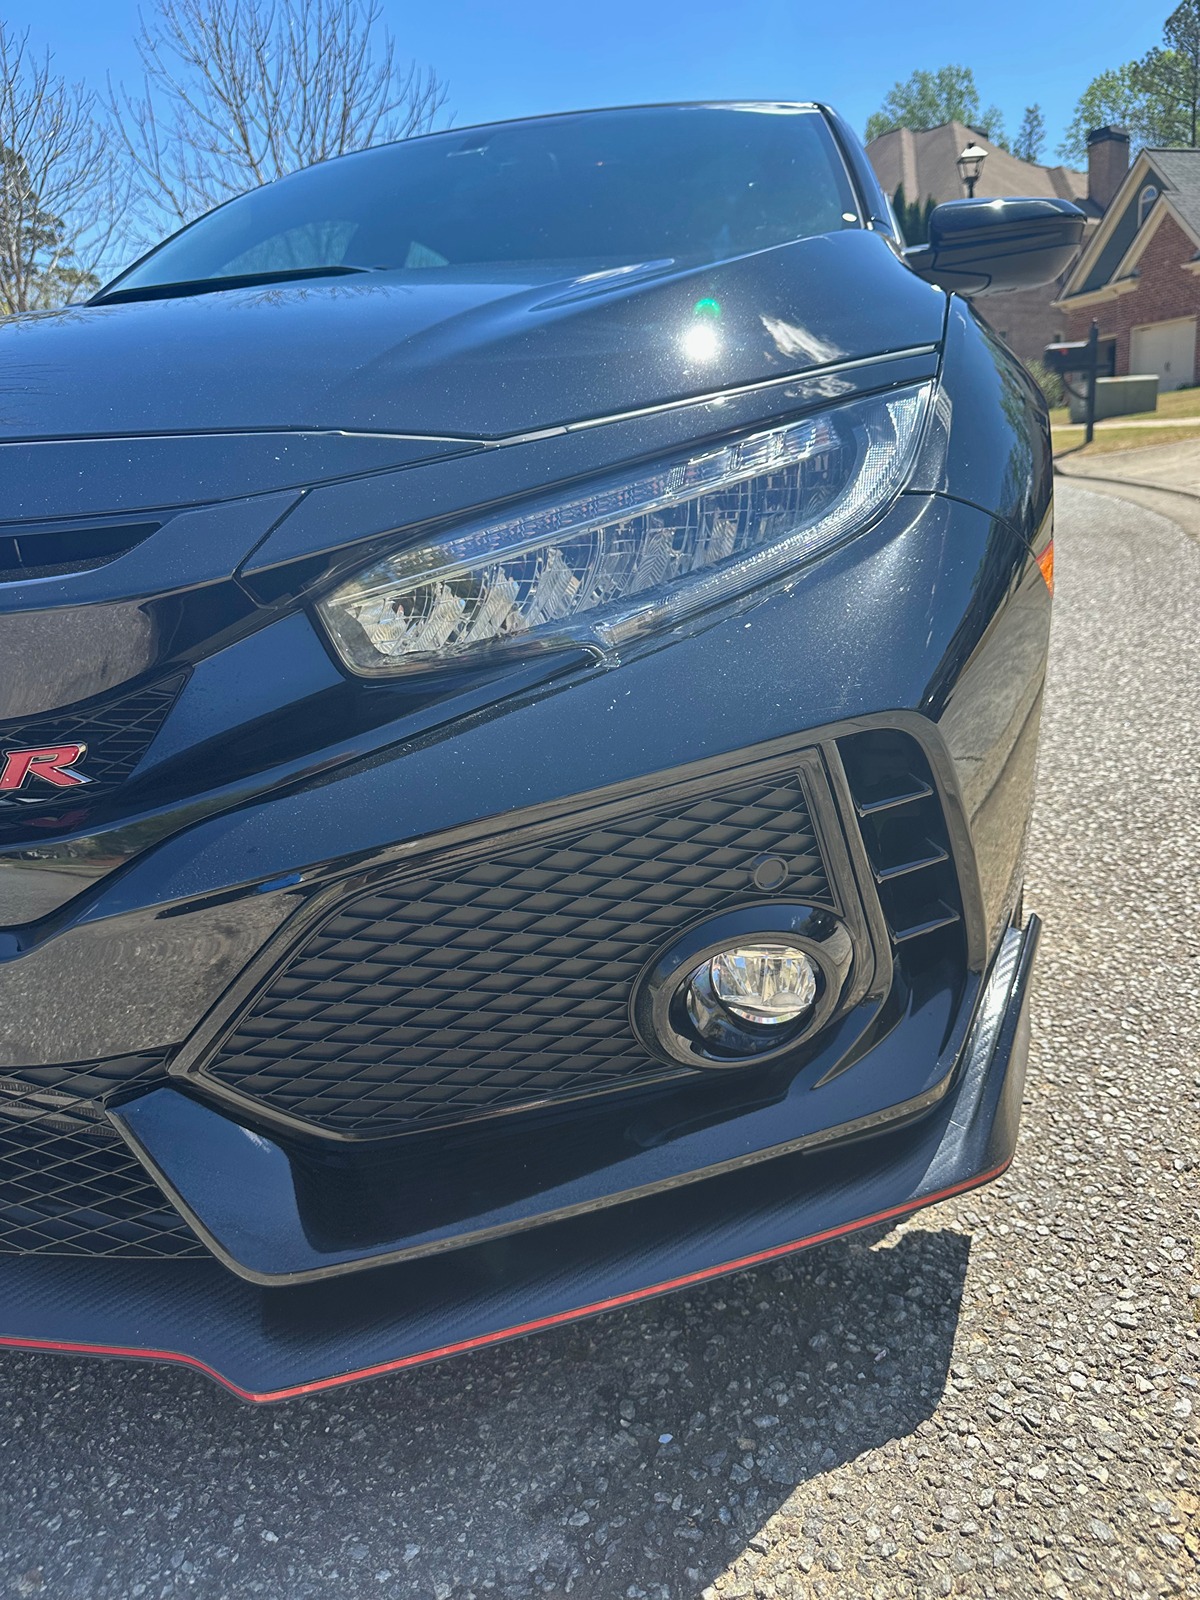 Honda Civic 10th gen Sold. 2019 Civic Type R for sale IMG_8119